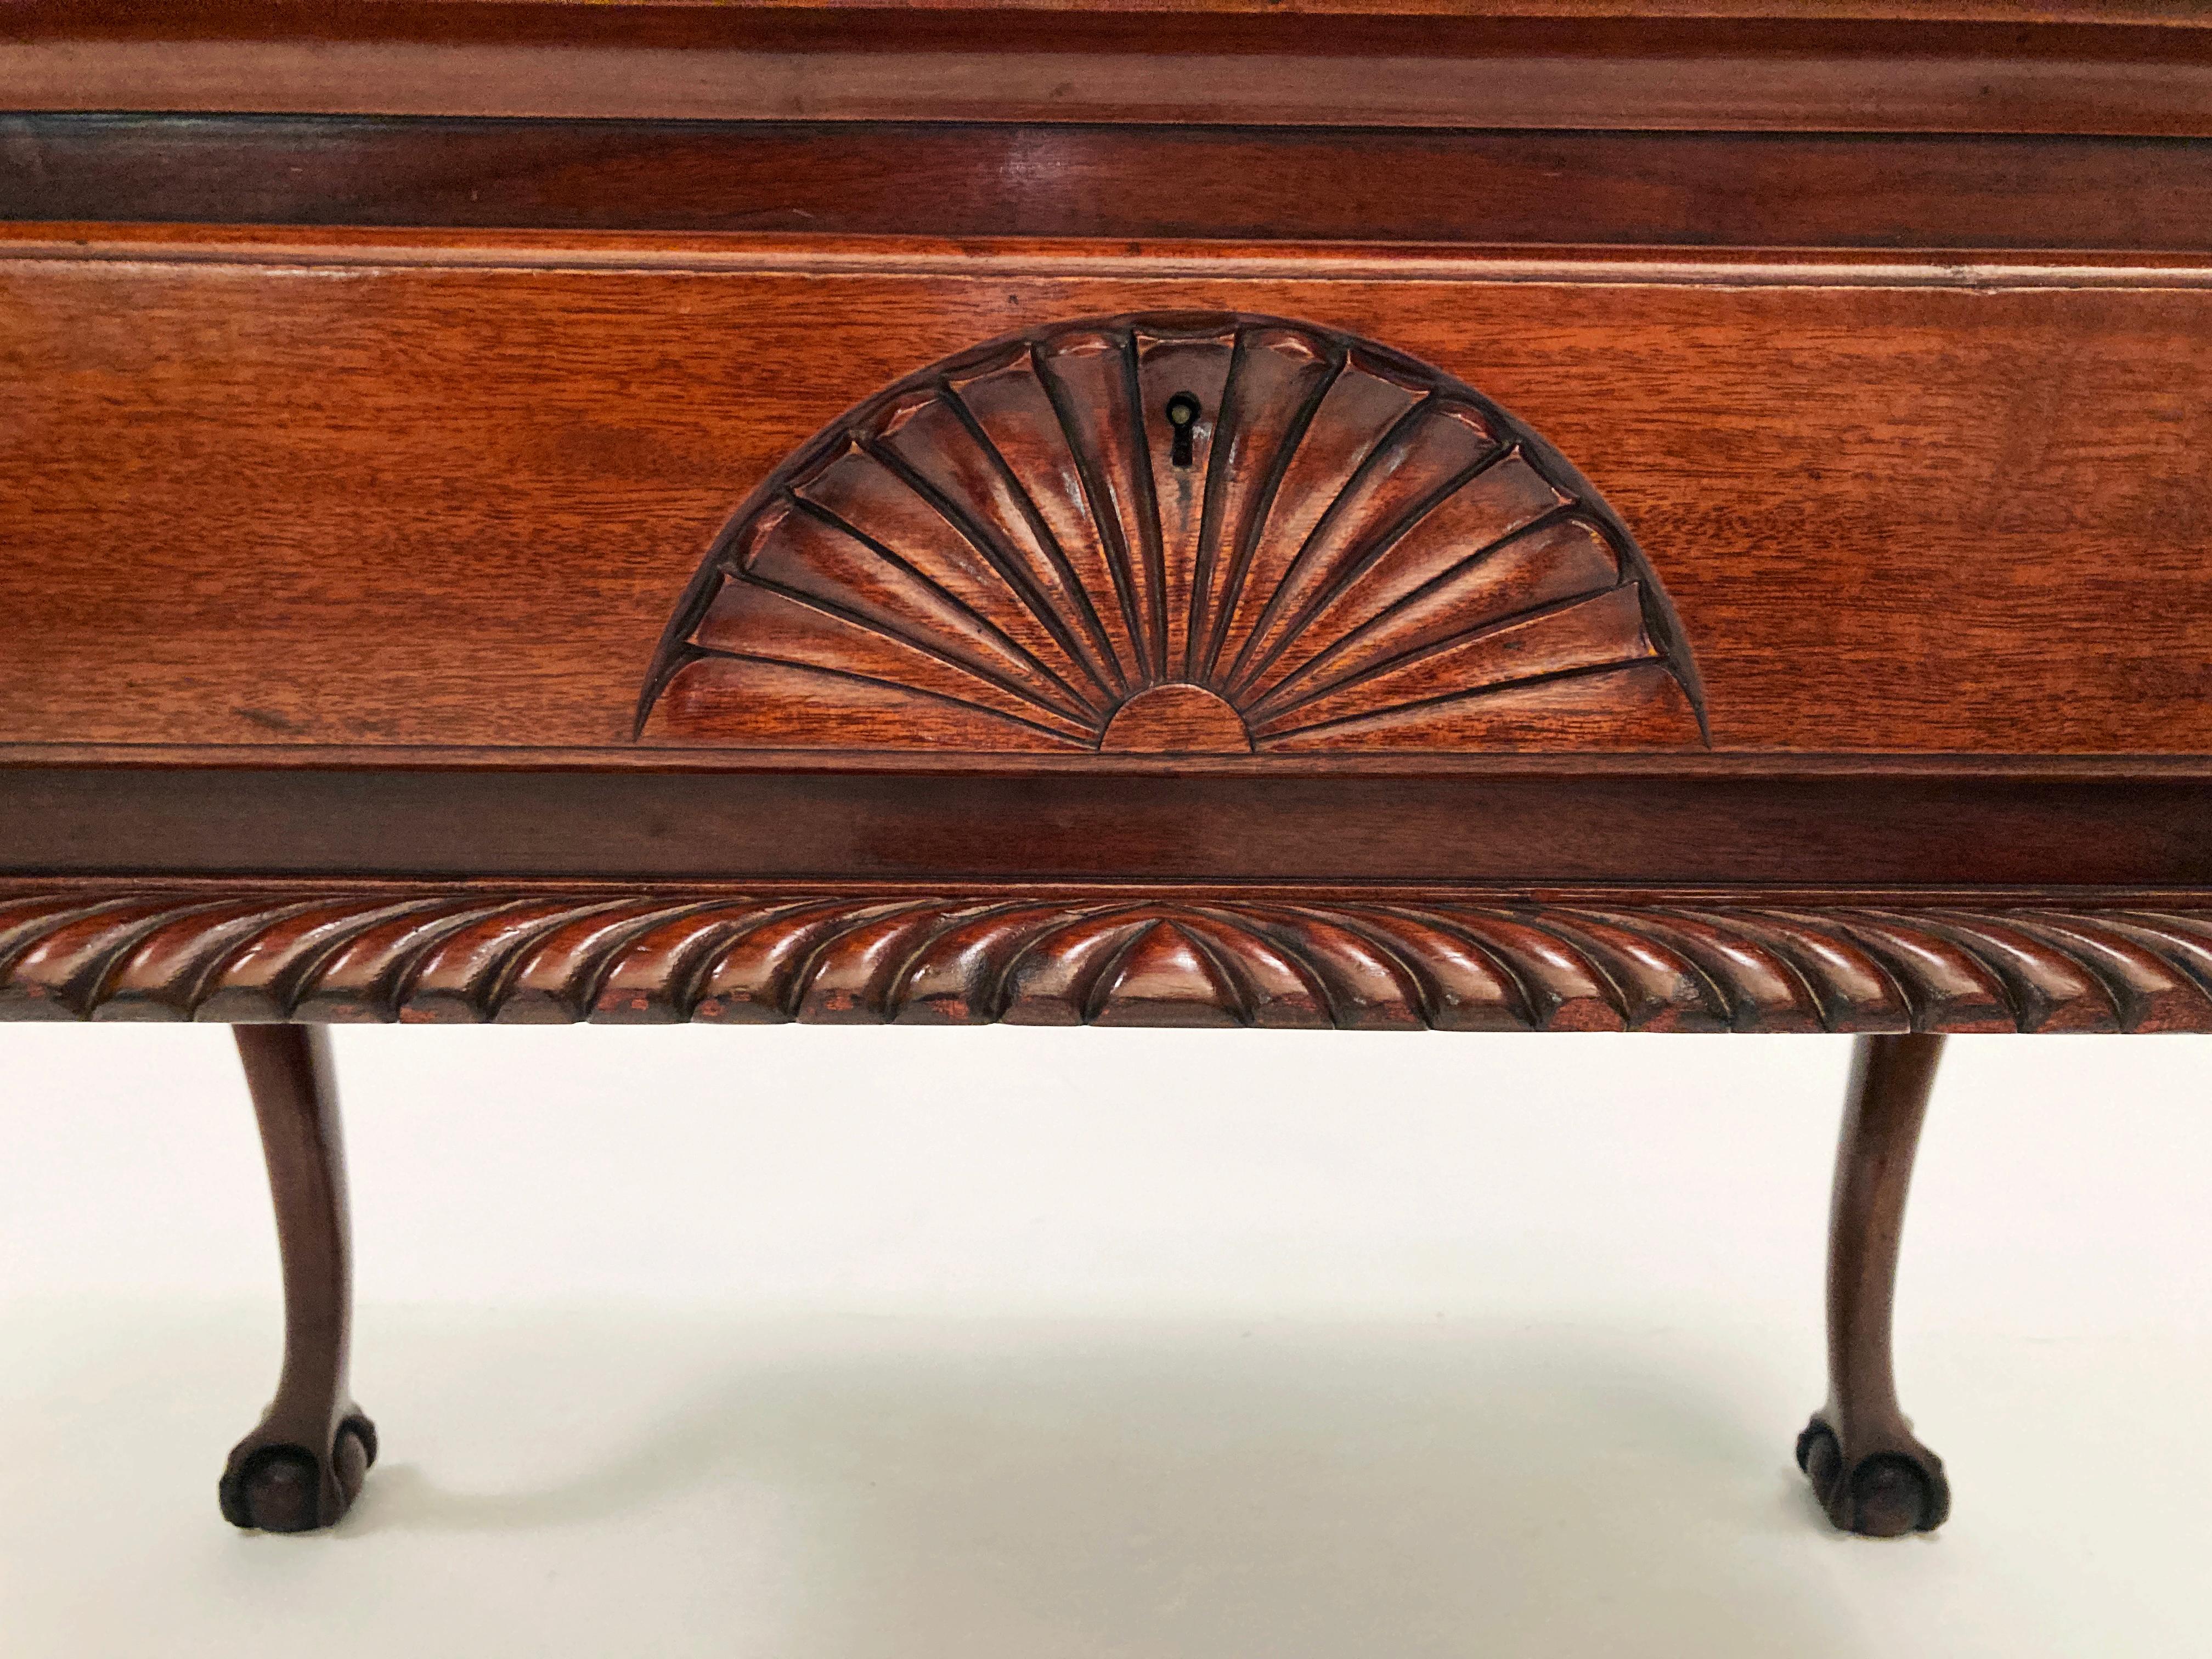 Single Drawer Mahogany Chippendale Table Ball Claw Feet English Mid 19th Century For Sale 2